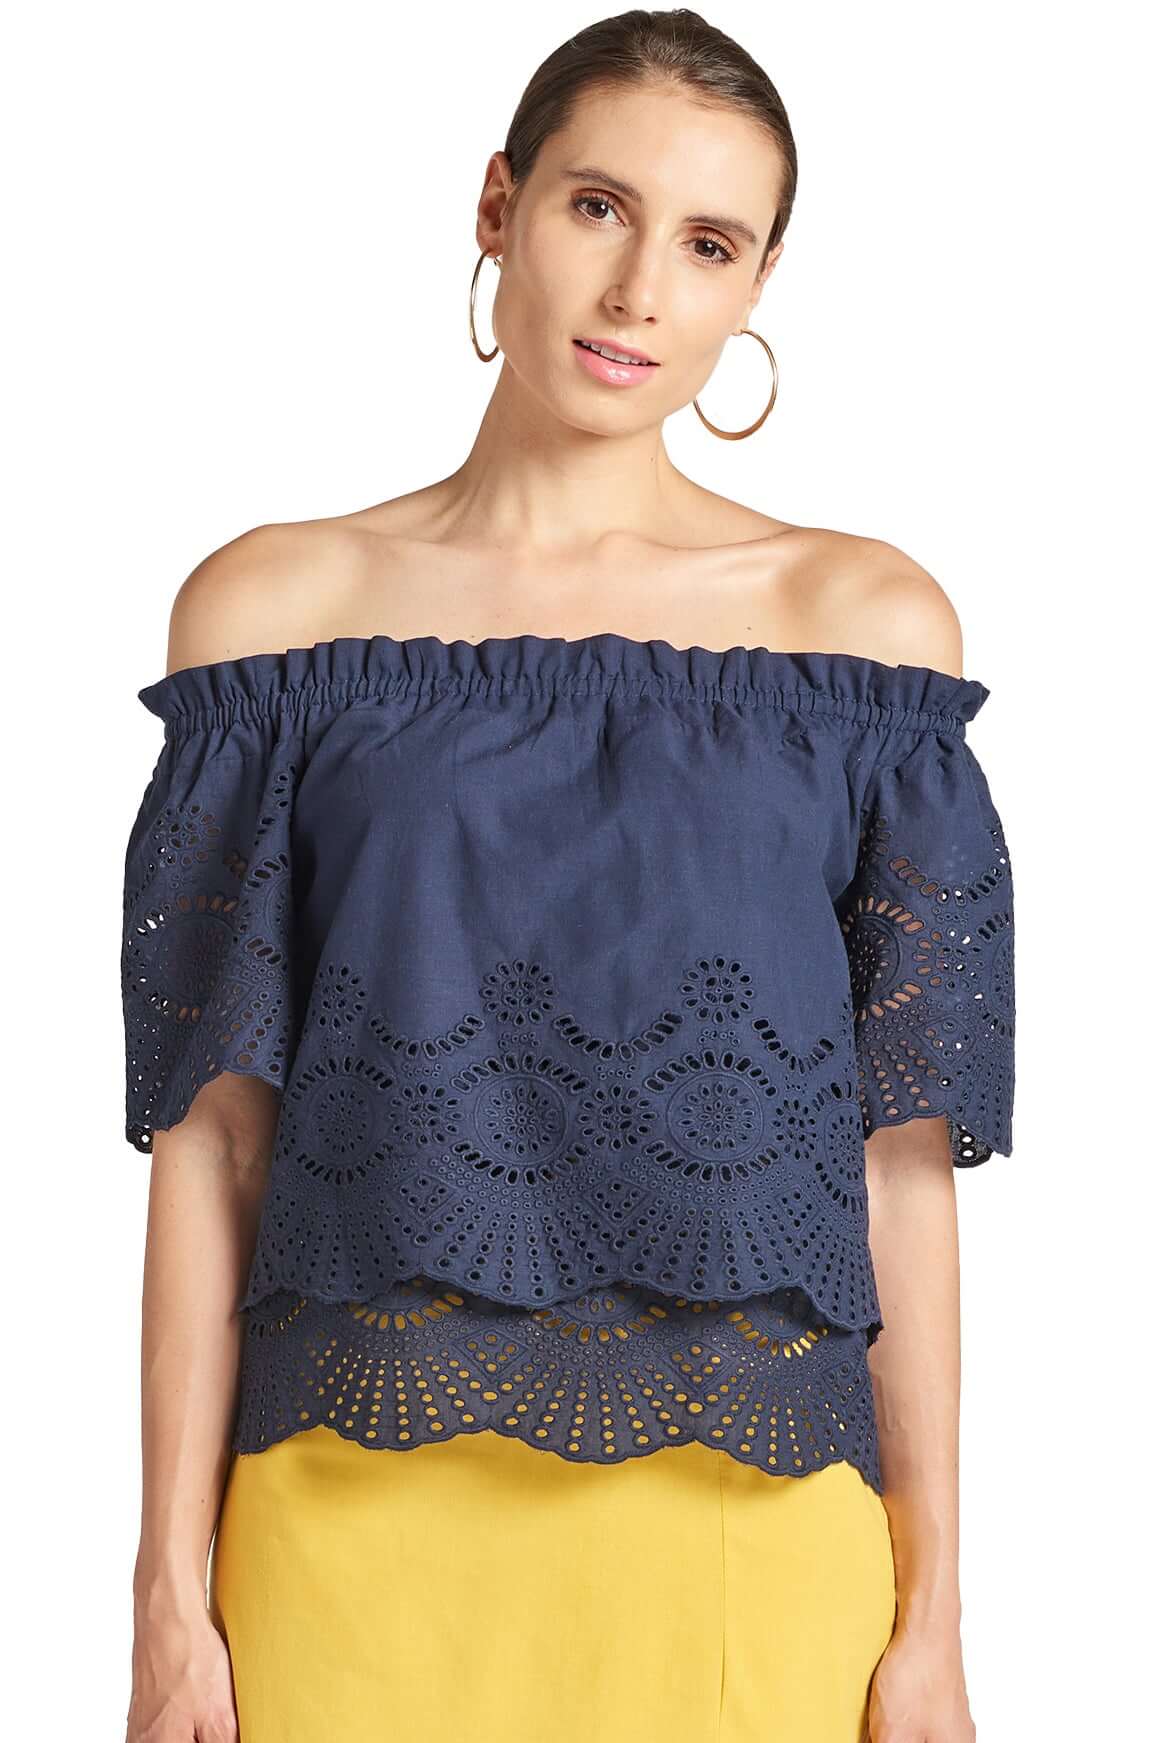 Model wearing navy off the shoulder cotton eyelet top with scalloped short sleeves and scalloped bottom hem.